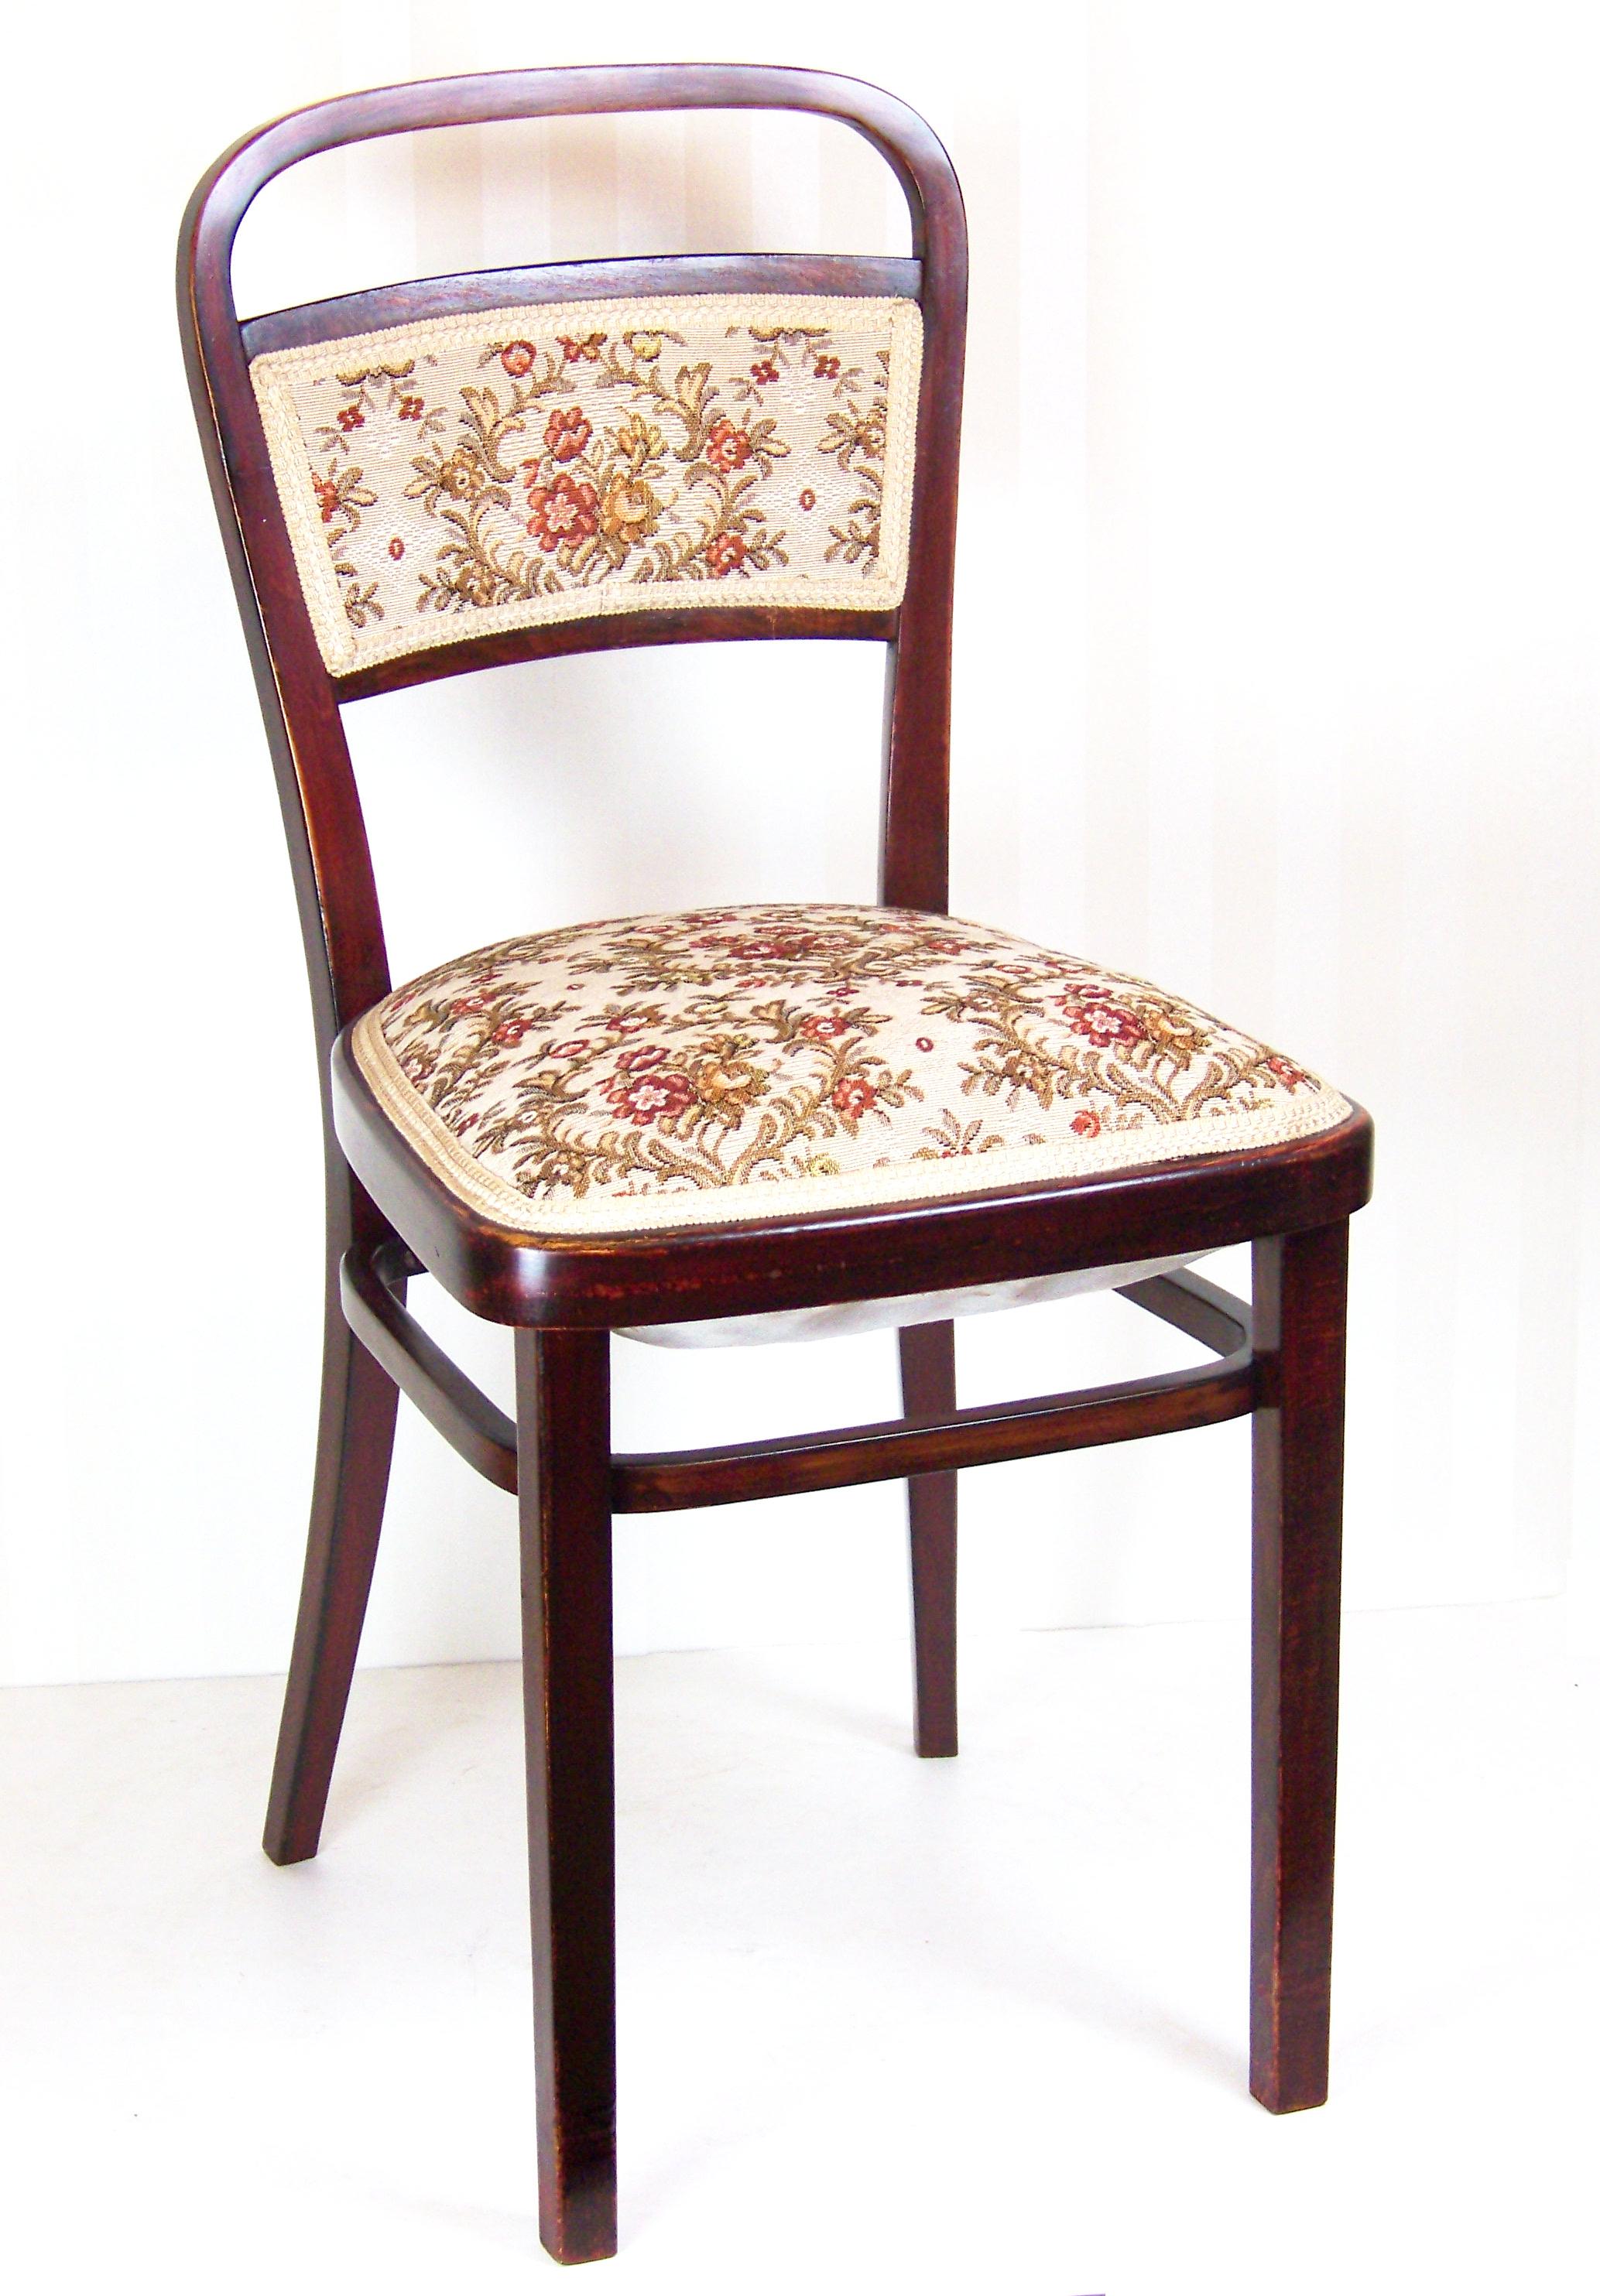 Upholstered version of the chair, designed in 1905 by Otto Wagner for the Viennese Österreichische Postsparkasse . Wooden construction is perfectly cleaned and re-polished with shelack finish. The upholstery is older, the fabric is almost the same